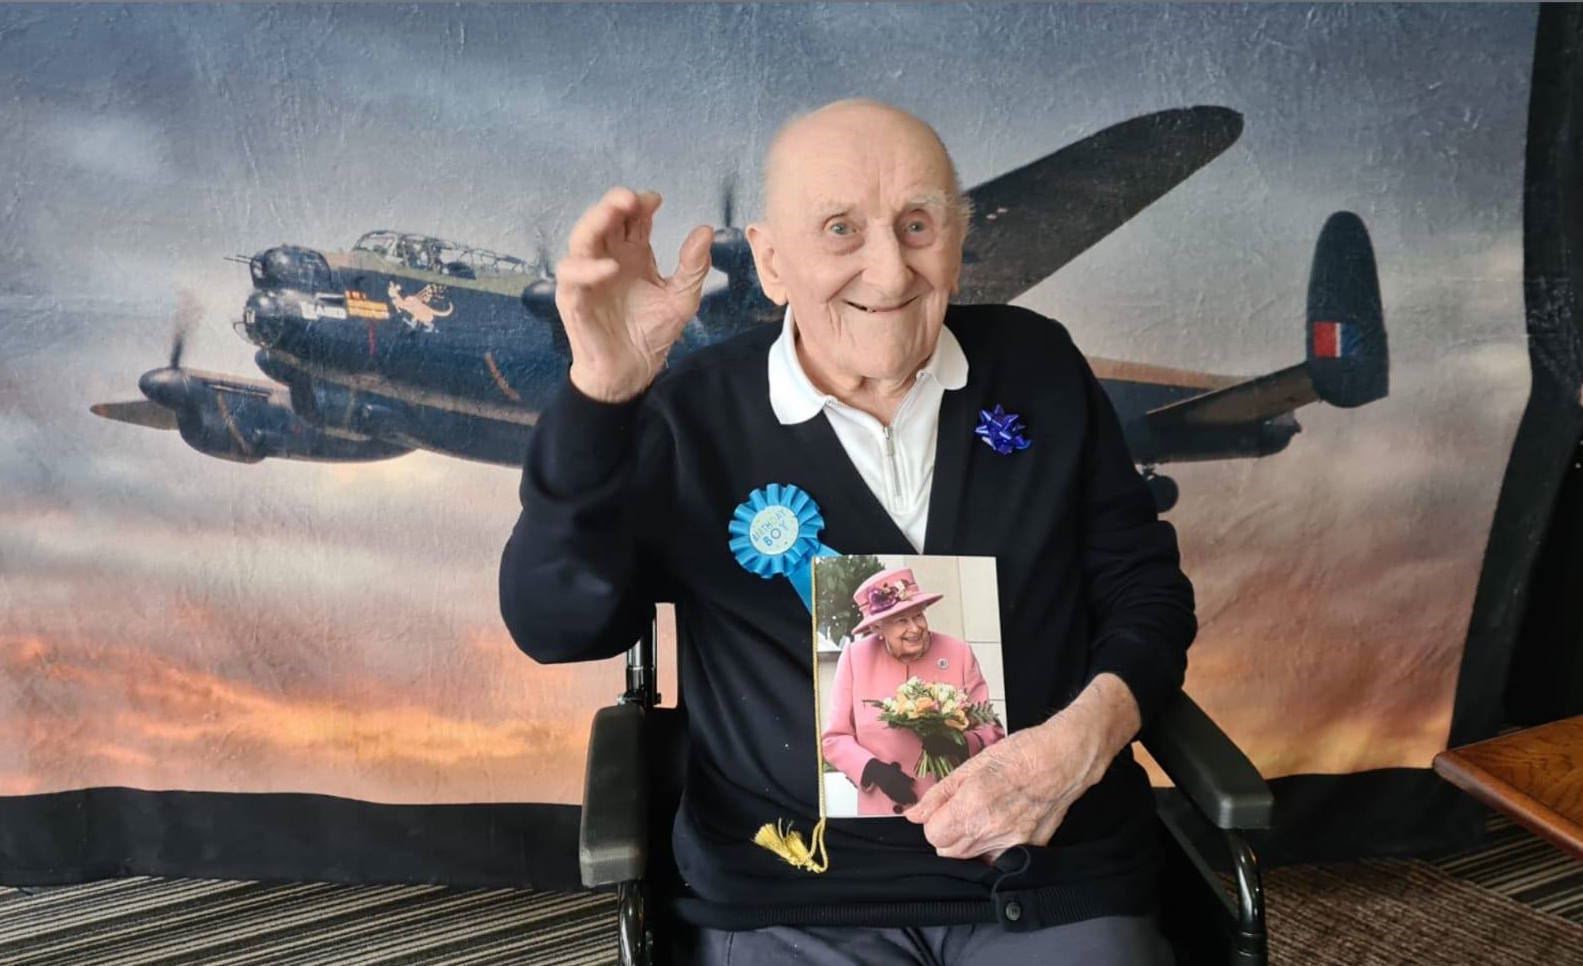 James Crook (100) with the birthday card from the Queen that he is now able to read thanks to help from the charity.